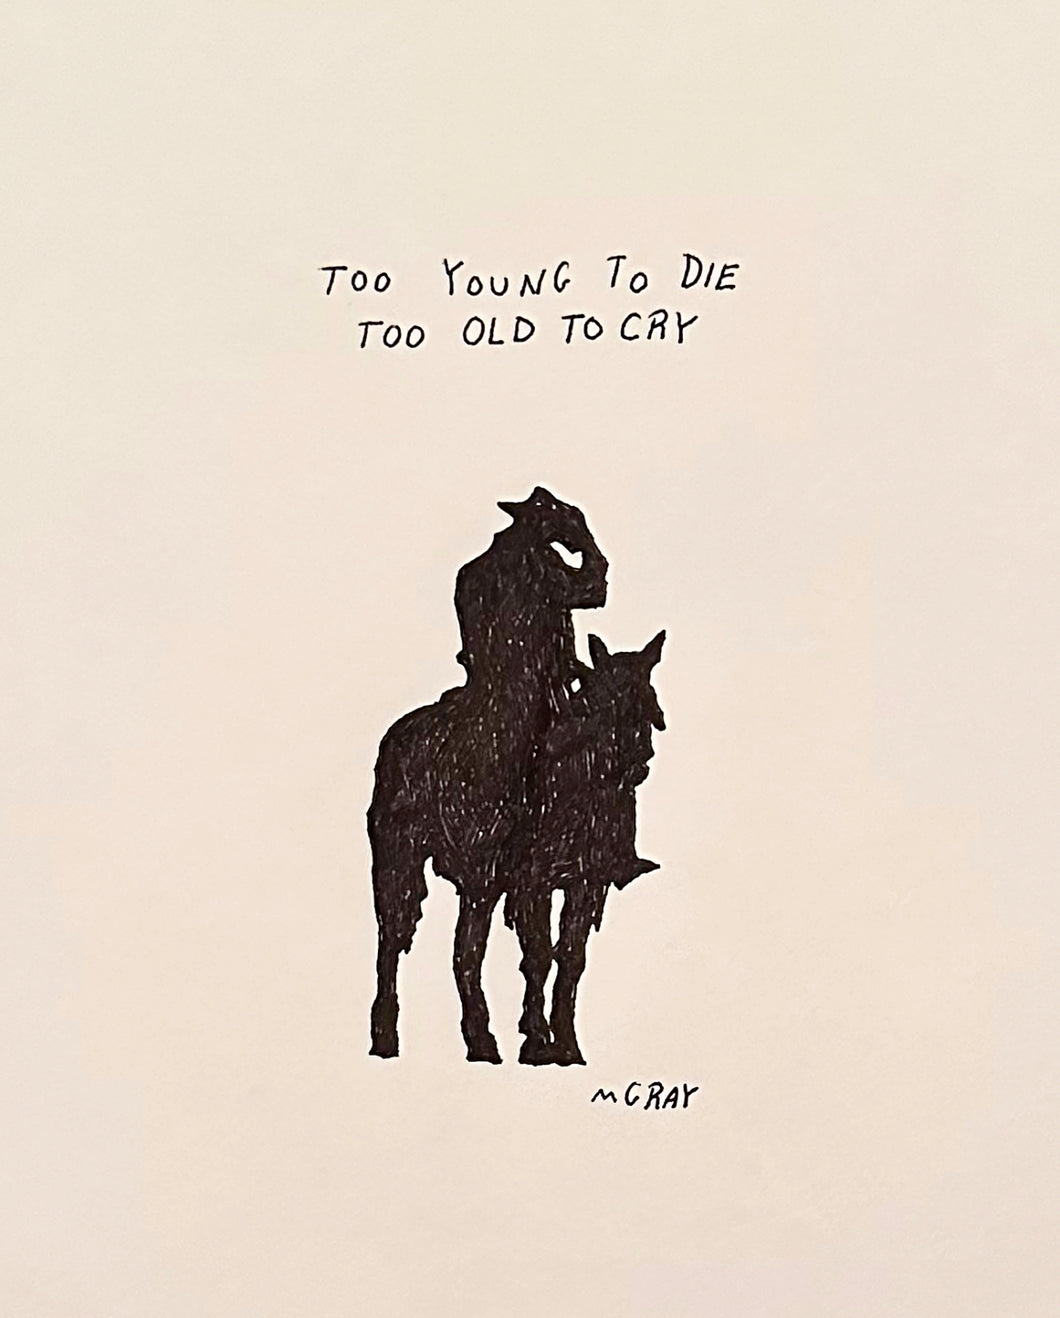 Too Old To Cry